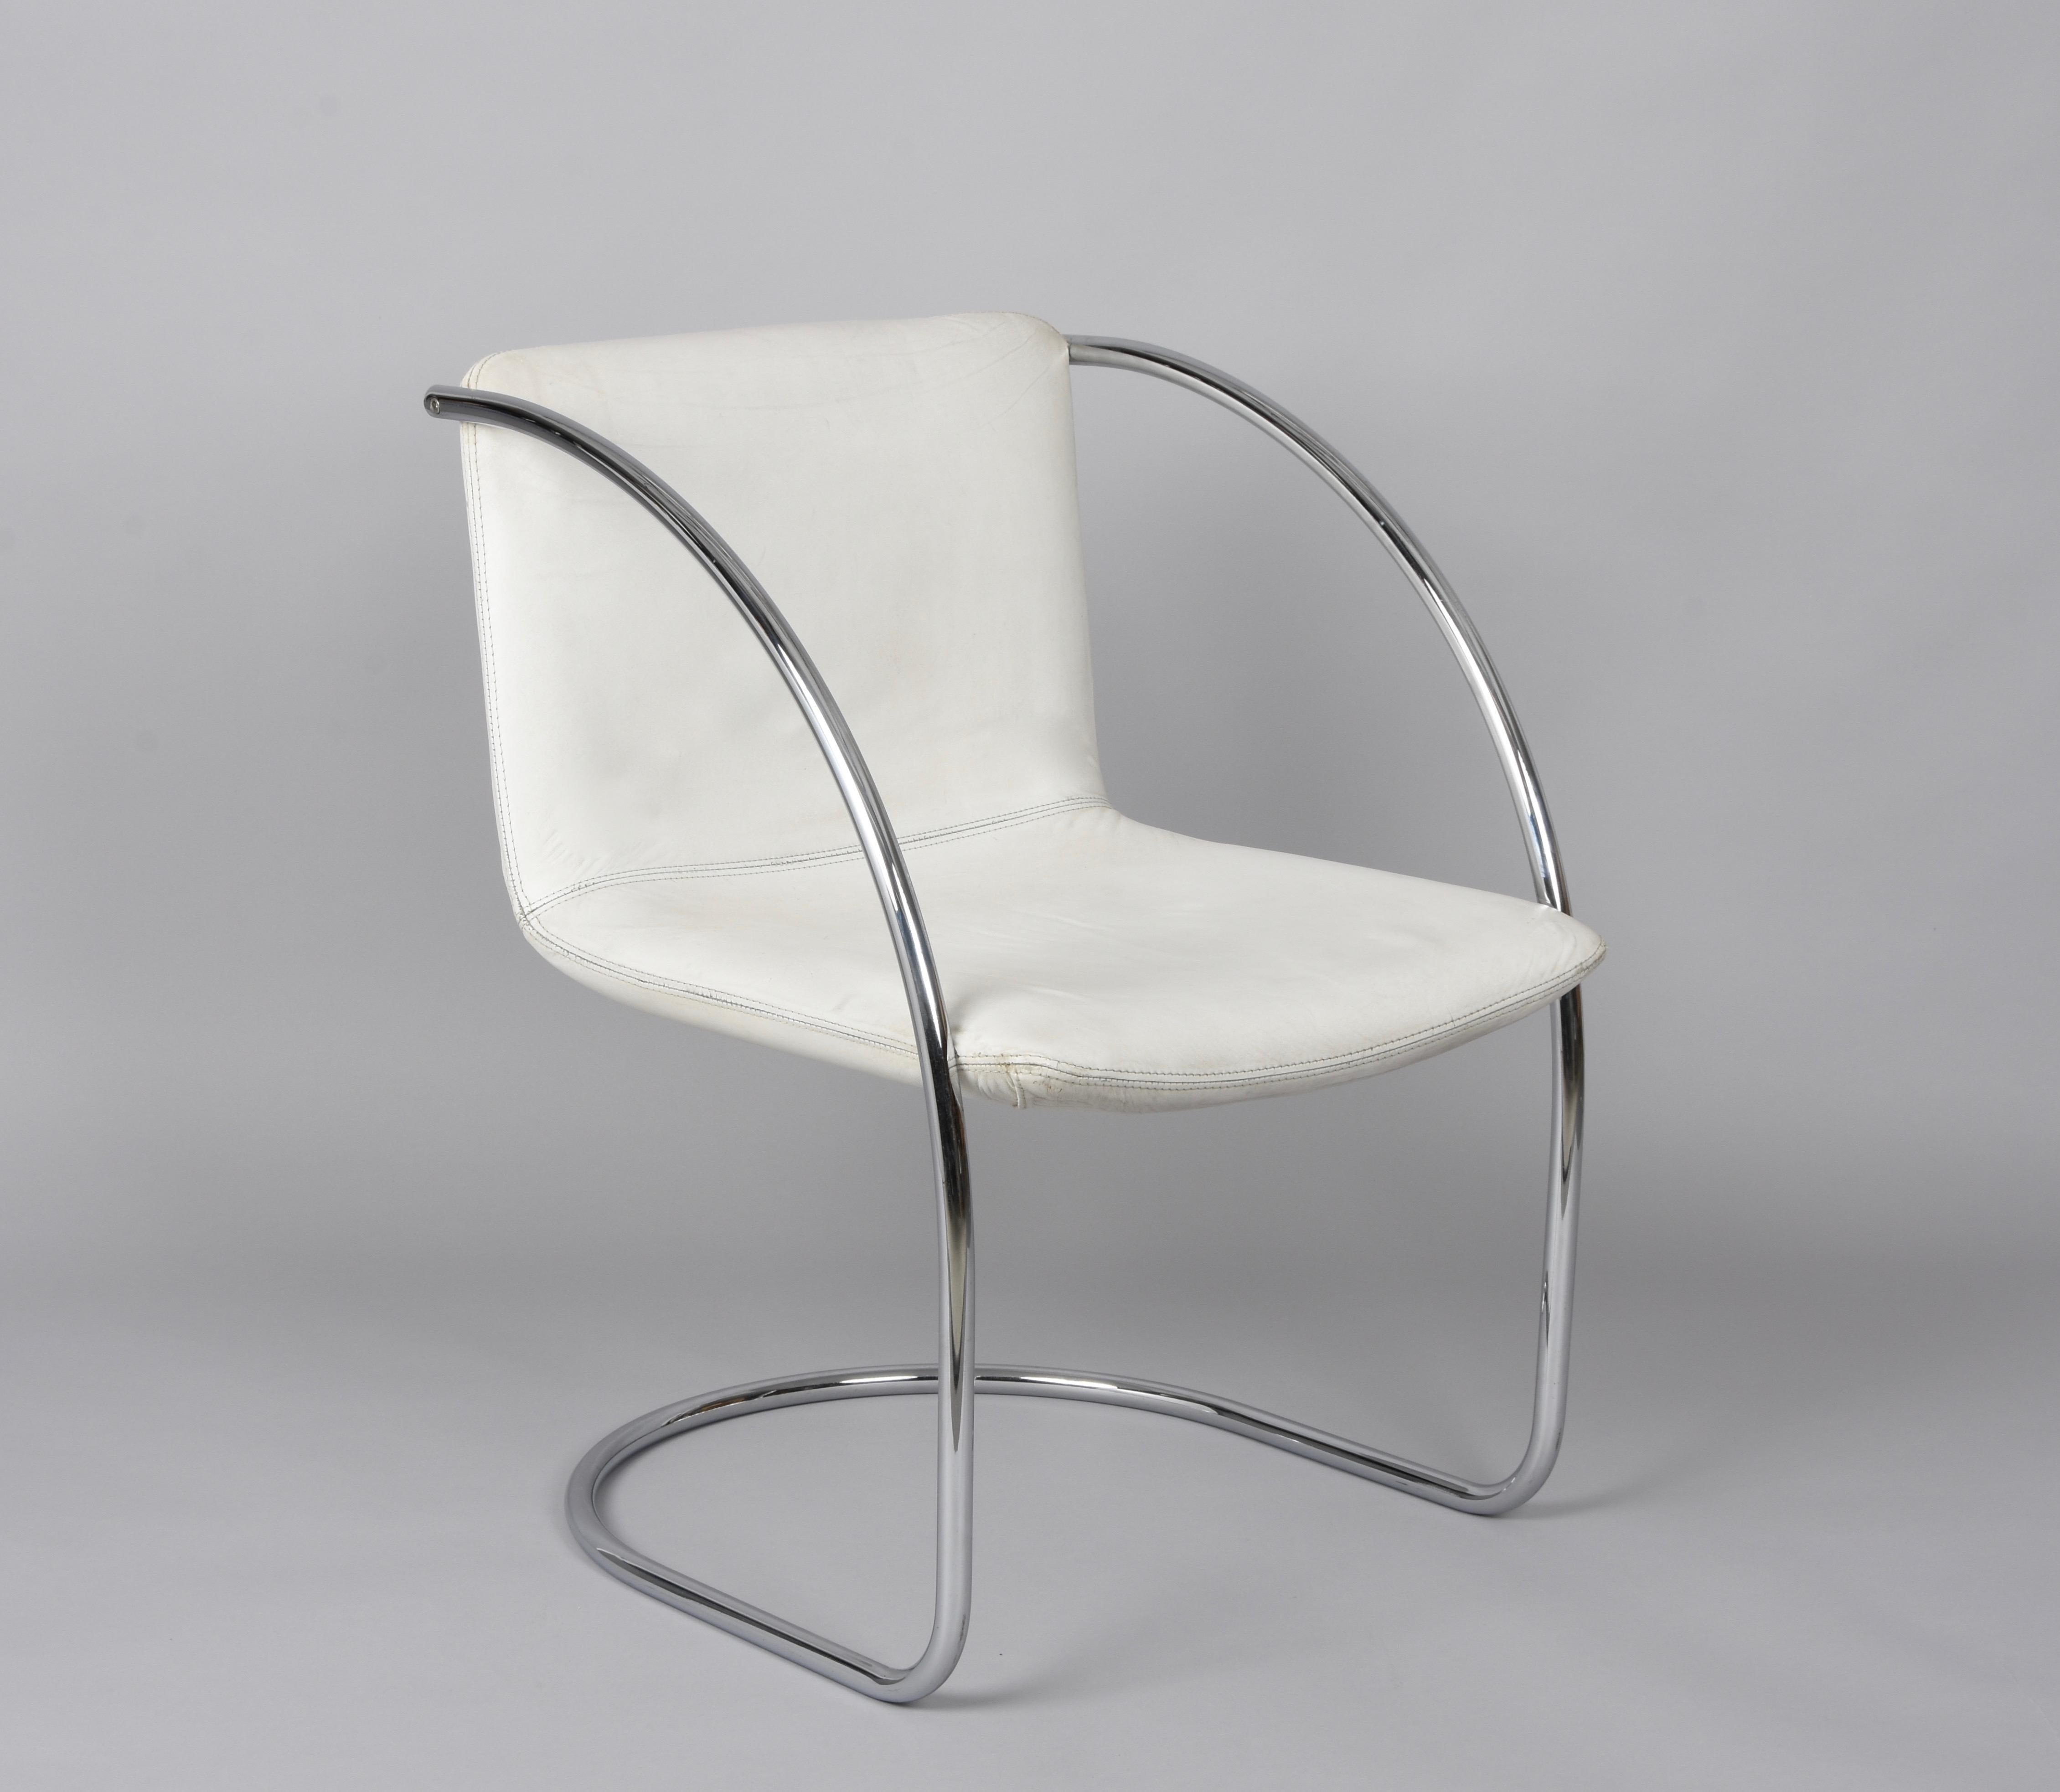 Marvellous midcentury lounge chair with tubular steel frames and white leather seat. The 